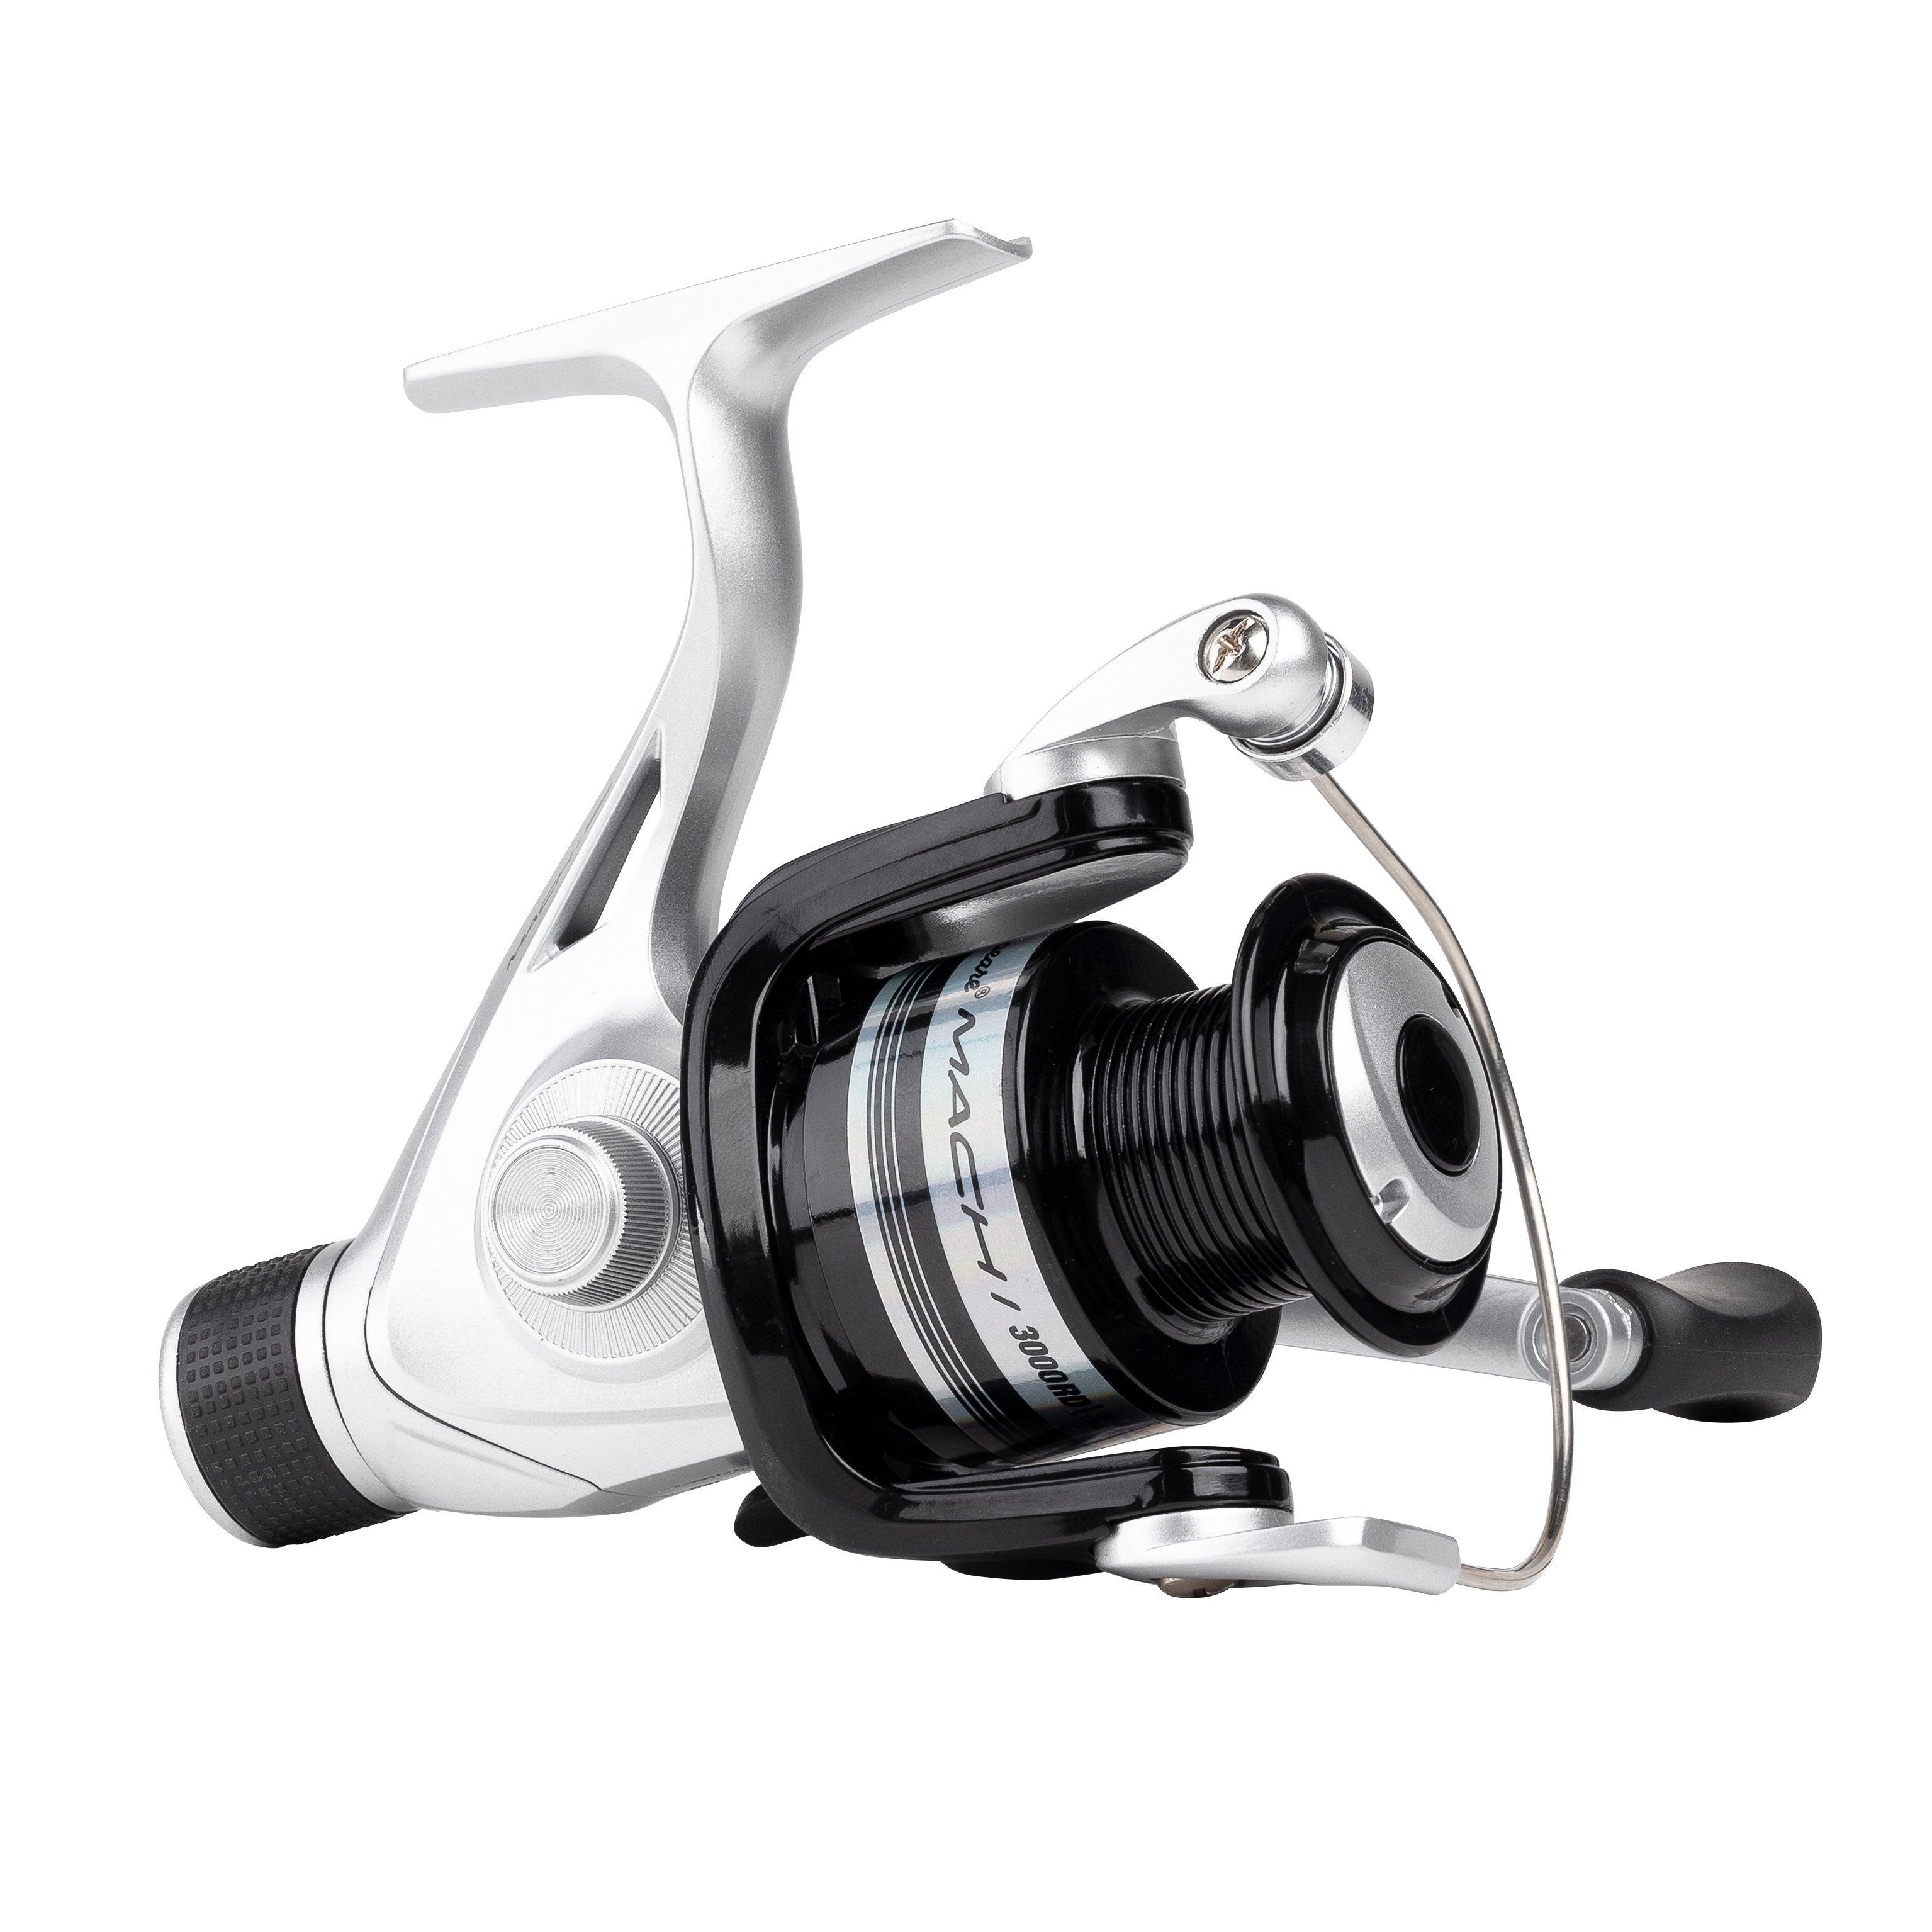 Shakespeare Mach 1 Spin Reel RD